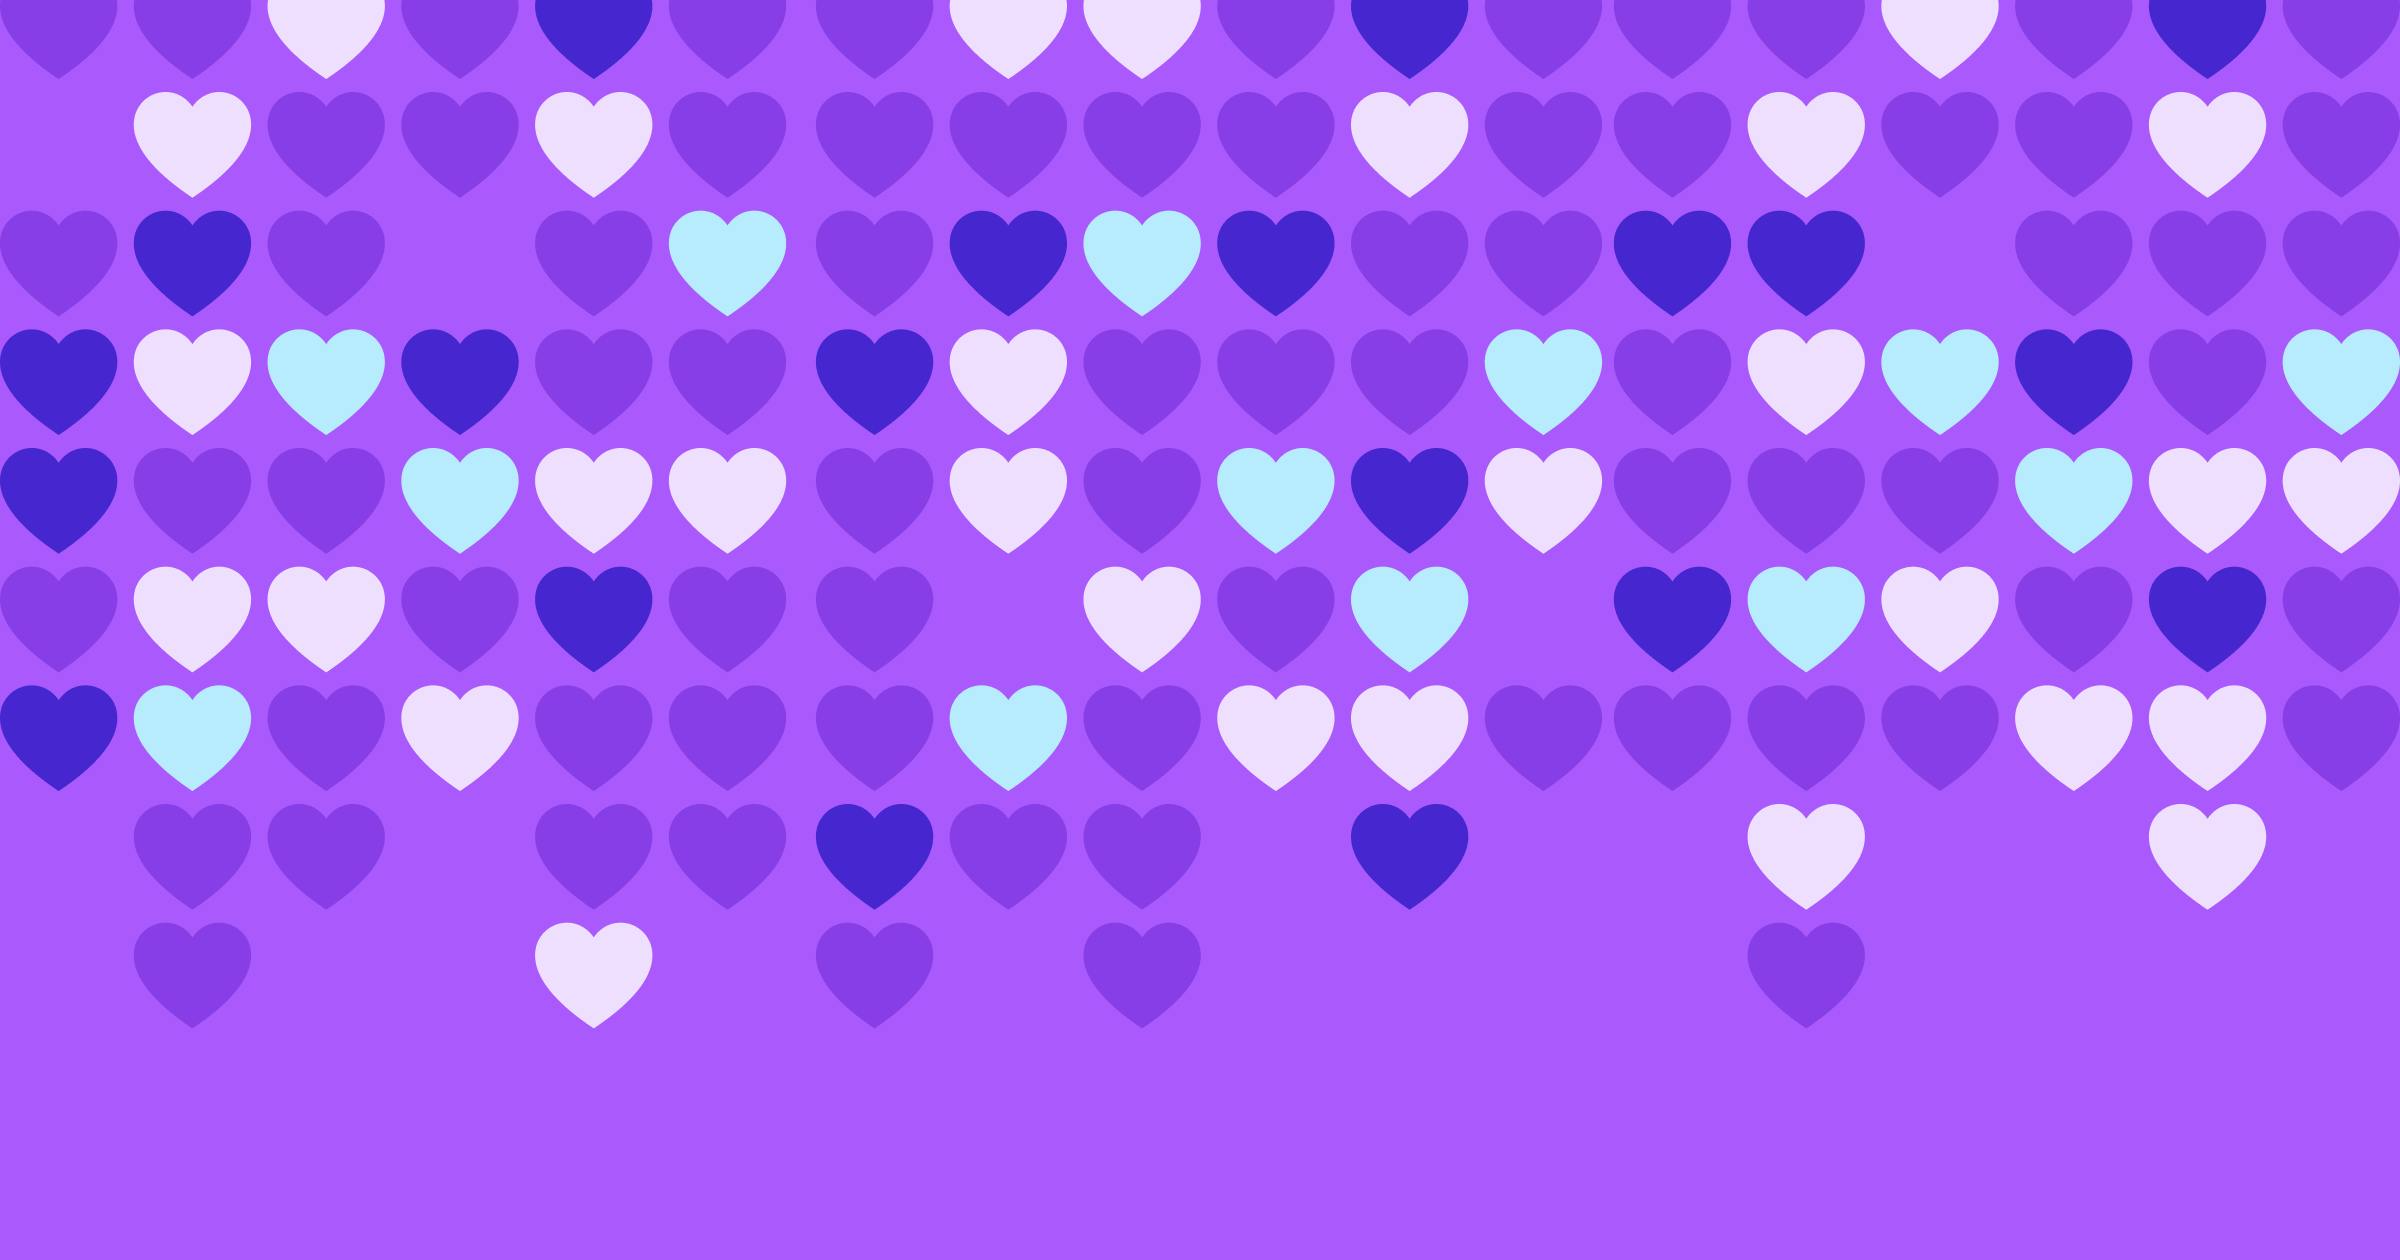 IIlustrated hearts on a purple background